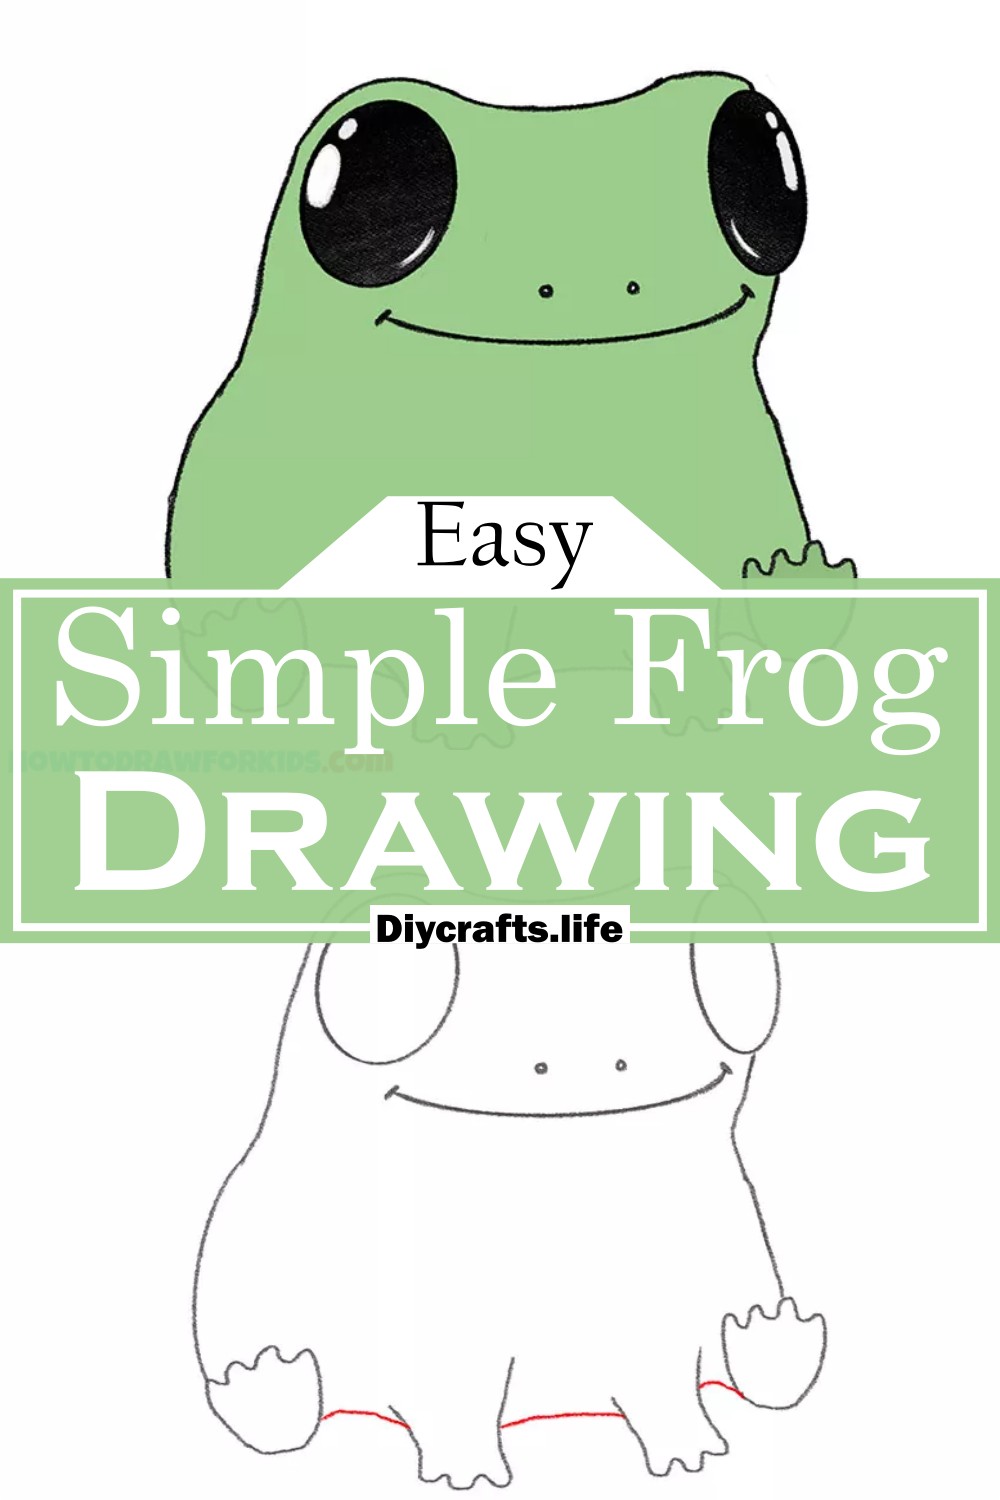 How to draw a 3D frog easy step by step - 3D drawing easy